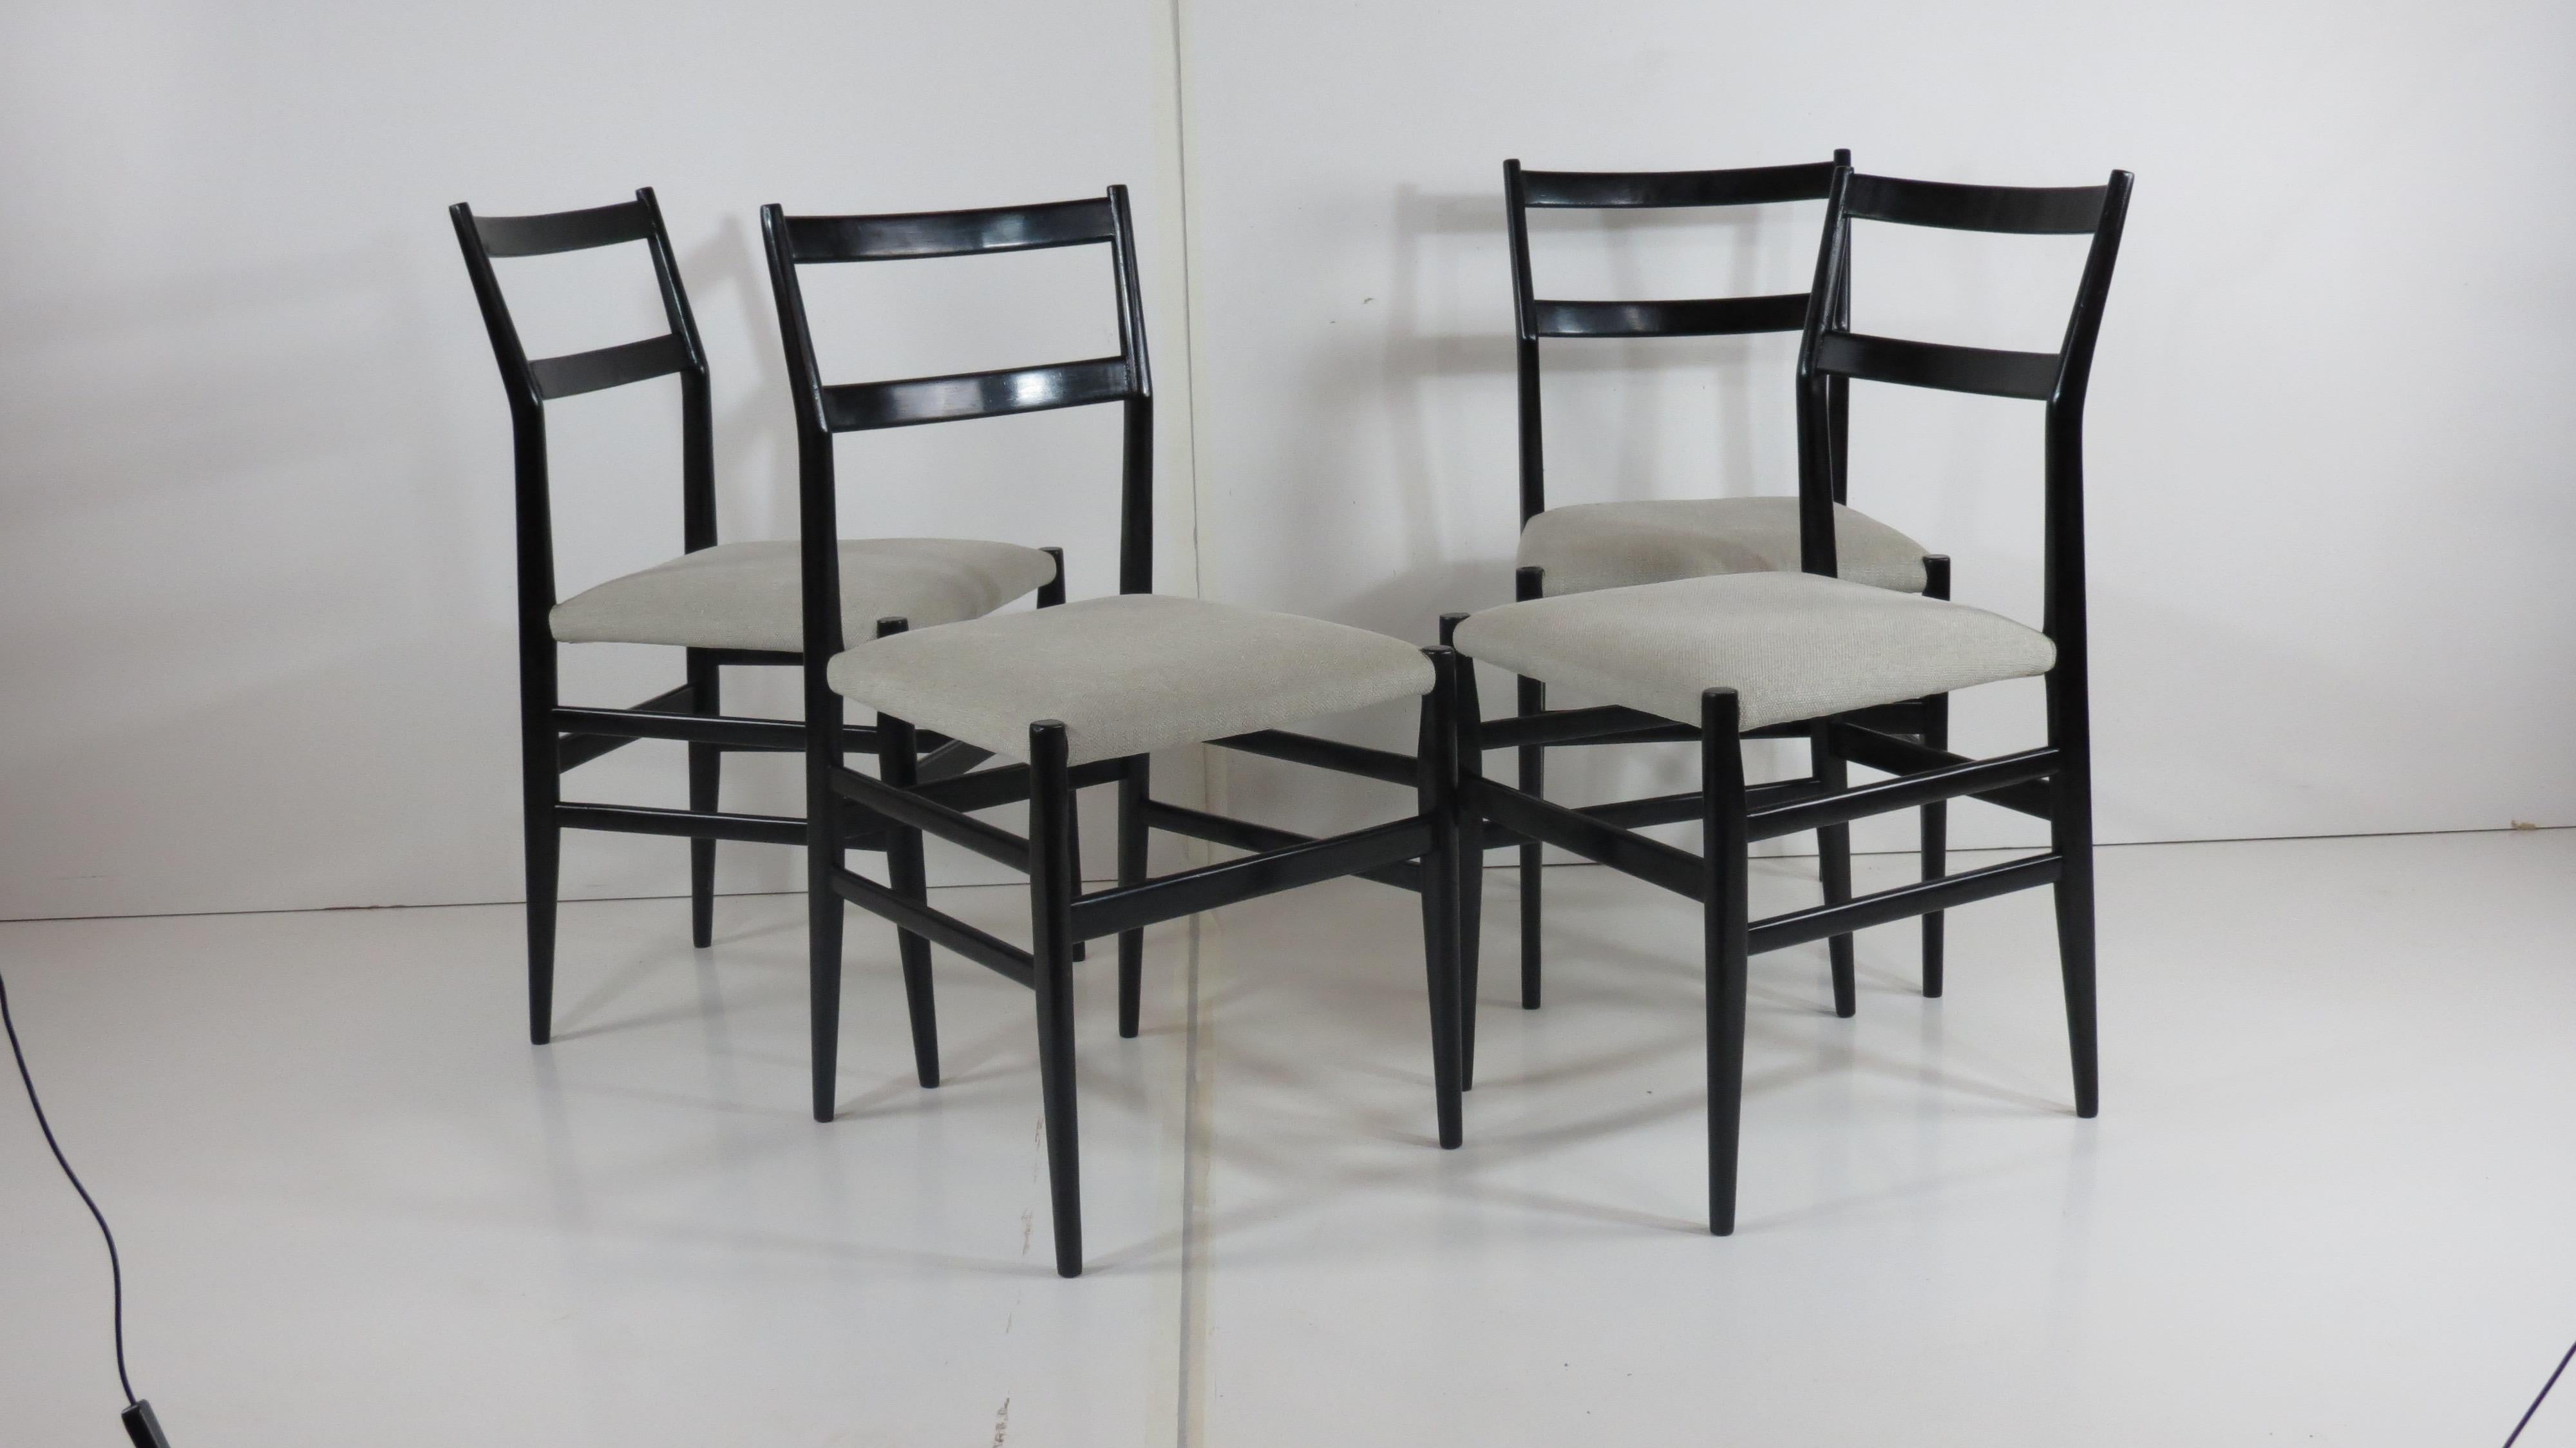 Four dining chairs designed by Gio Ponti and produced by F.gli Amedeo Cassina, 1952
provenience: Hotel in south Italy 
laquered in black 
newly reupholstered in grey cotton 
very good original condition 
ash and cotton 
Measures: height: 83